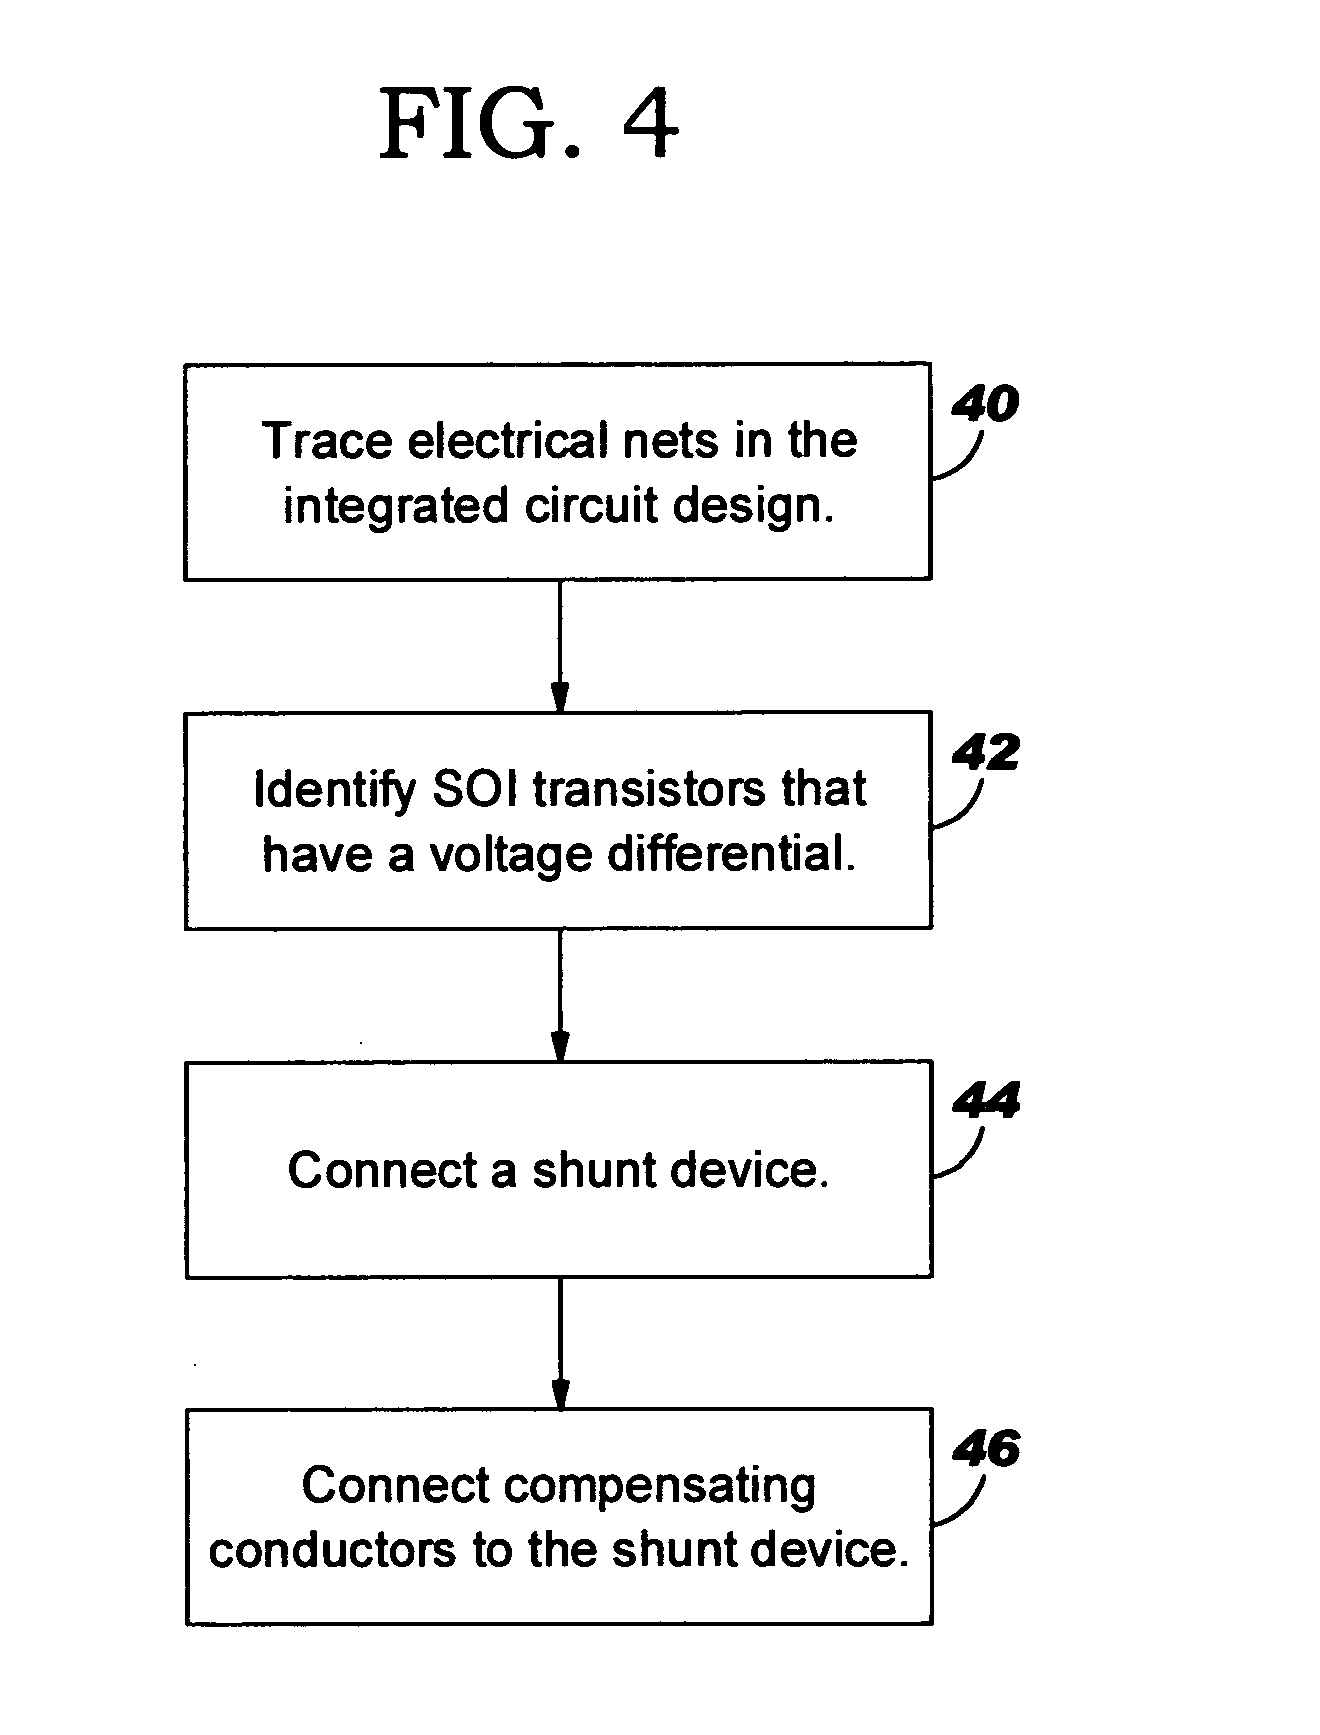 Method of assessing potential for charging damage in soi designs and structures for eliminating potential for damage